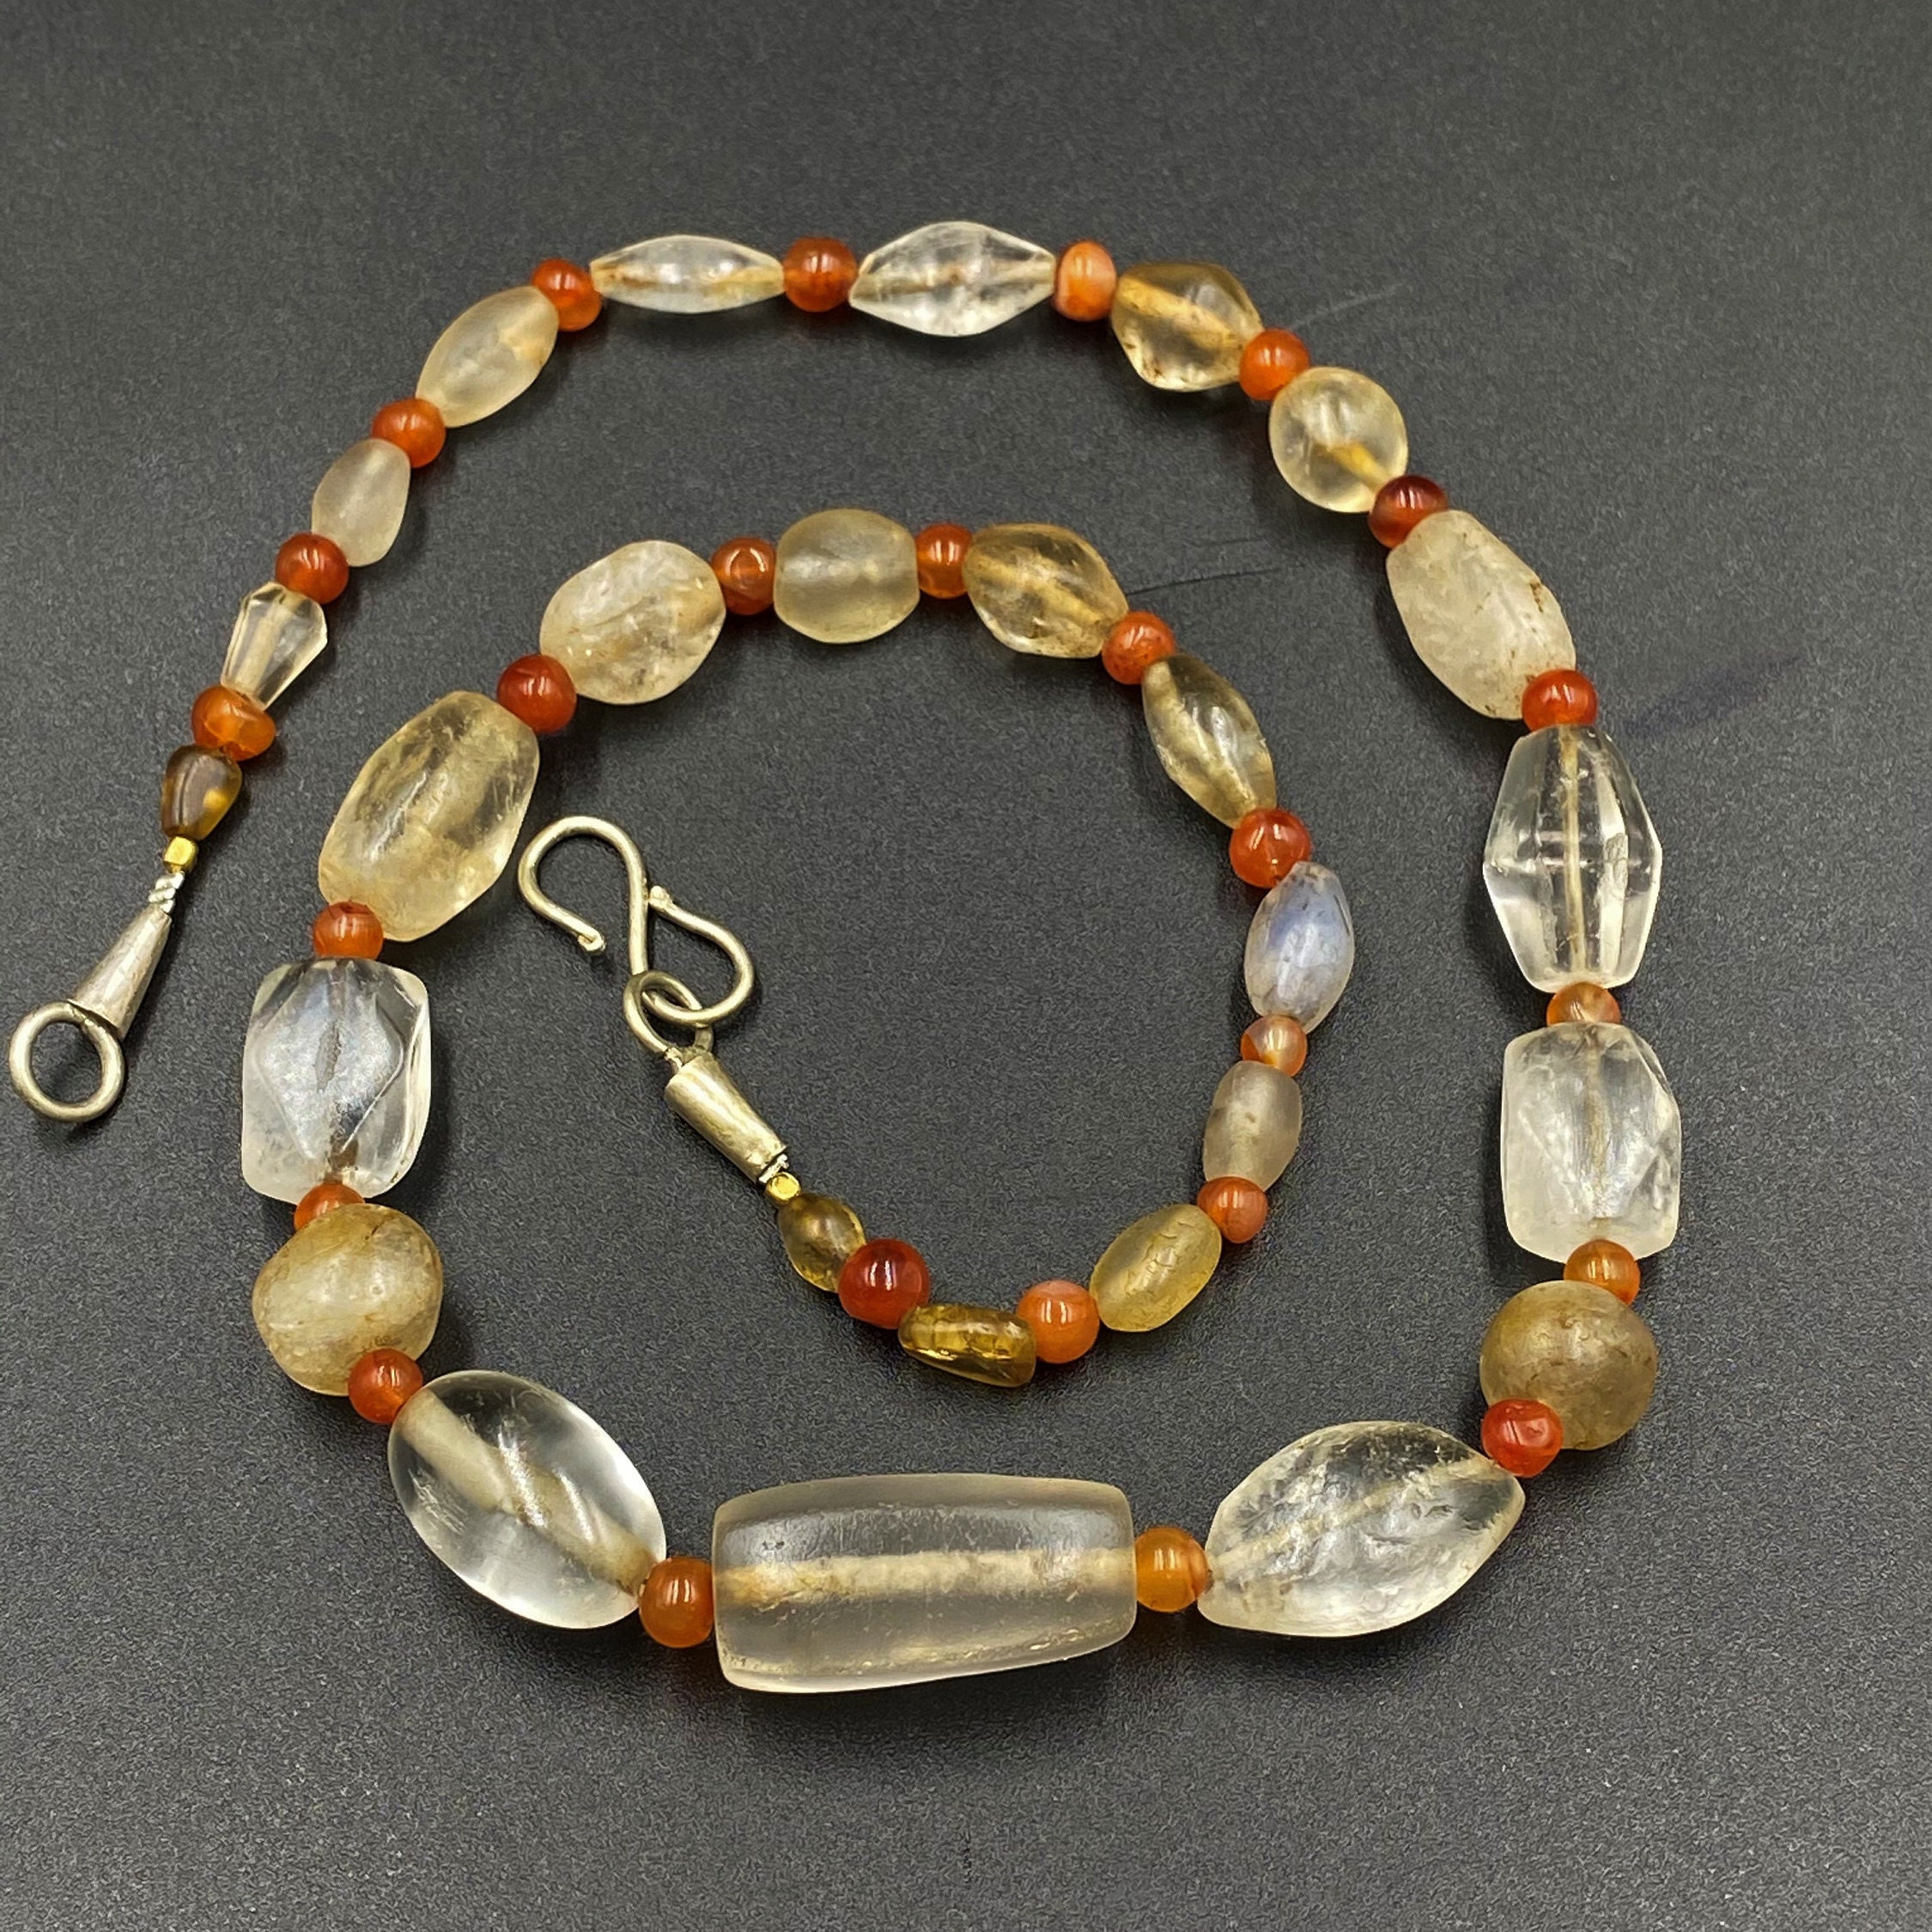 Extremely Rare Crystal Carnelian Necklace Circa 2nd Century | Etsy